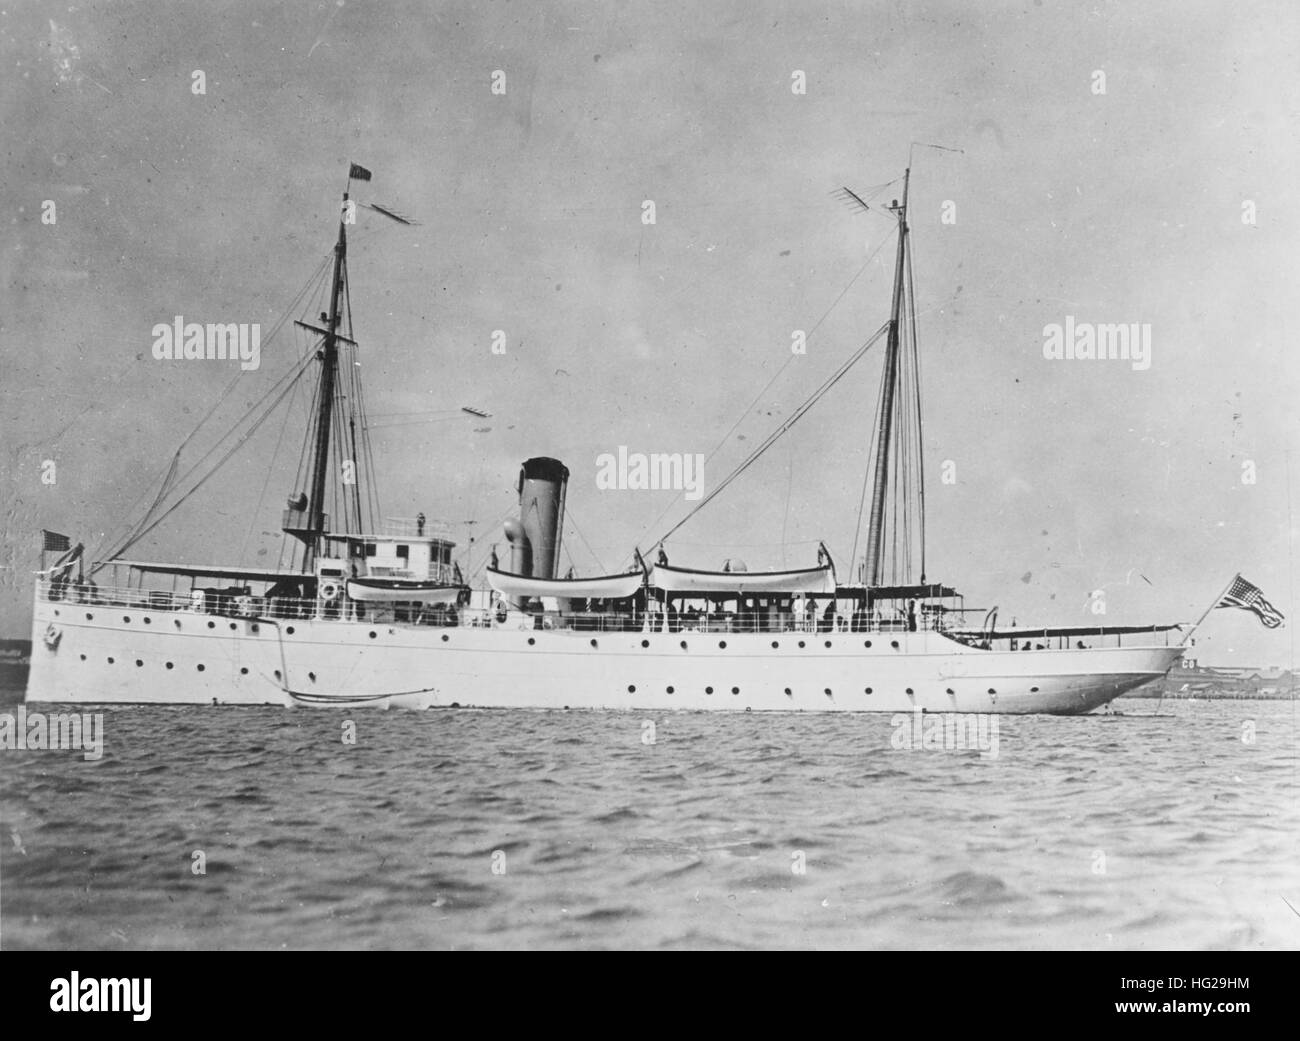 USCGC Tampa (Coast Guard Cutter, 1912) photographed in harbor, prior to World War I. Completed in 1912 as the U.S. Revenue Cutter Miami, this ship was renamed Tampa in February 1916. On 26 September 1918, while operating in the English Channel, she was torpedoed and sunk by the German Submarine UB-91. All 131 persons on board Tampa were lost with her, the largest loss of life on any U.S. combat vessel during the First World War. U.S. Naval History and Heritage Command Photograph. USCGC Tampa (ex Miami) Stock Photo